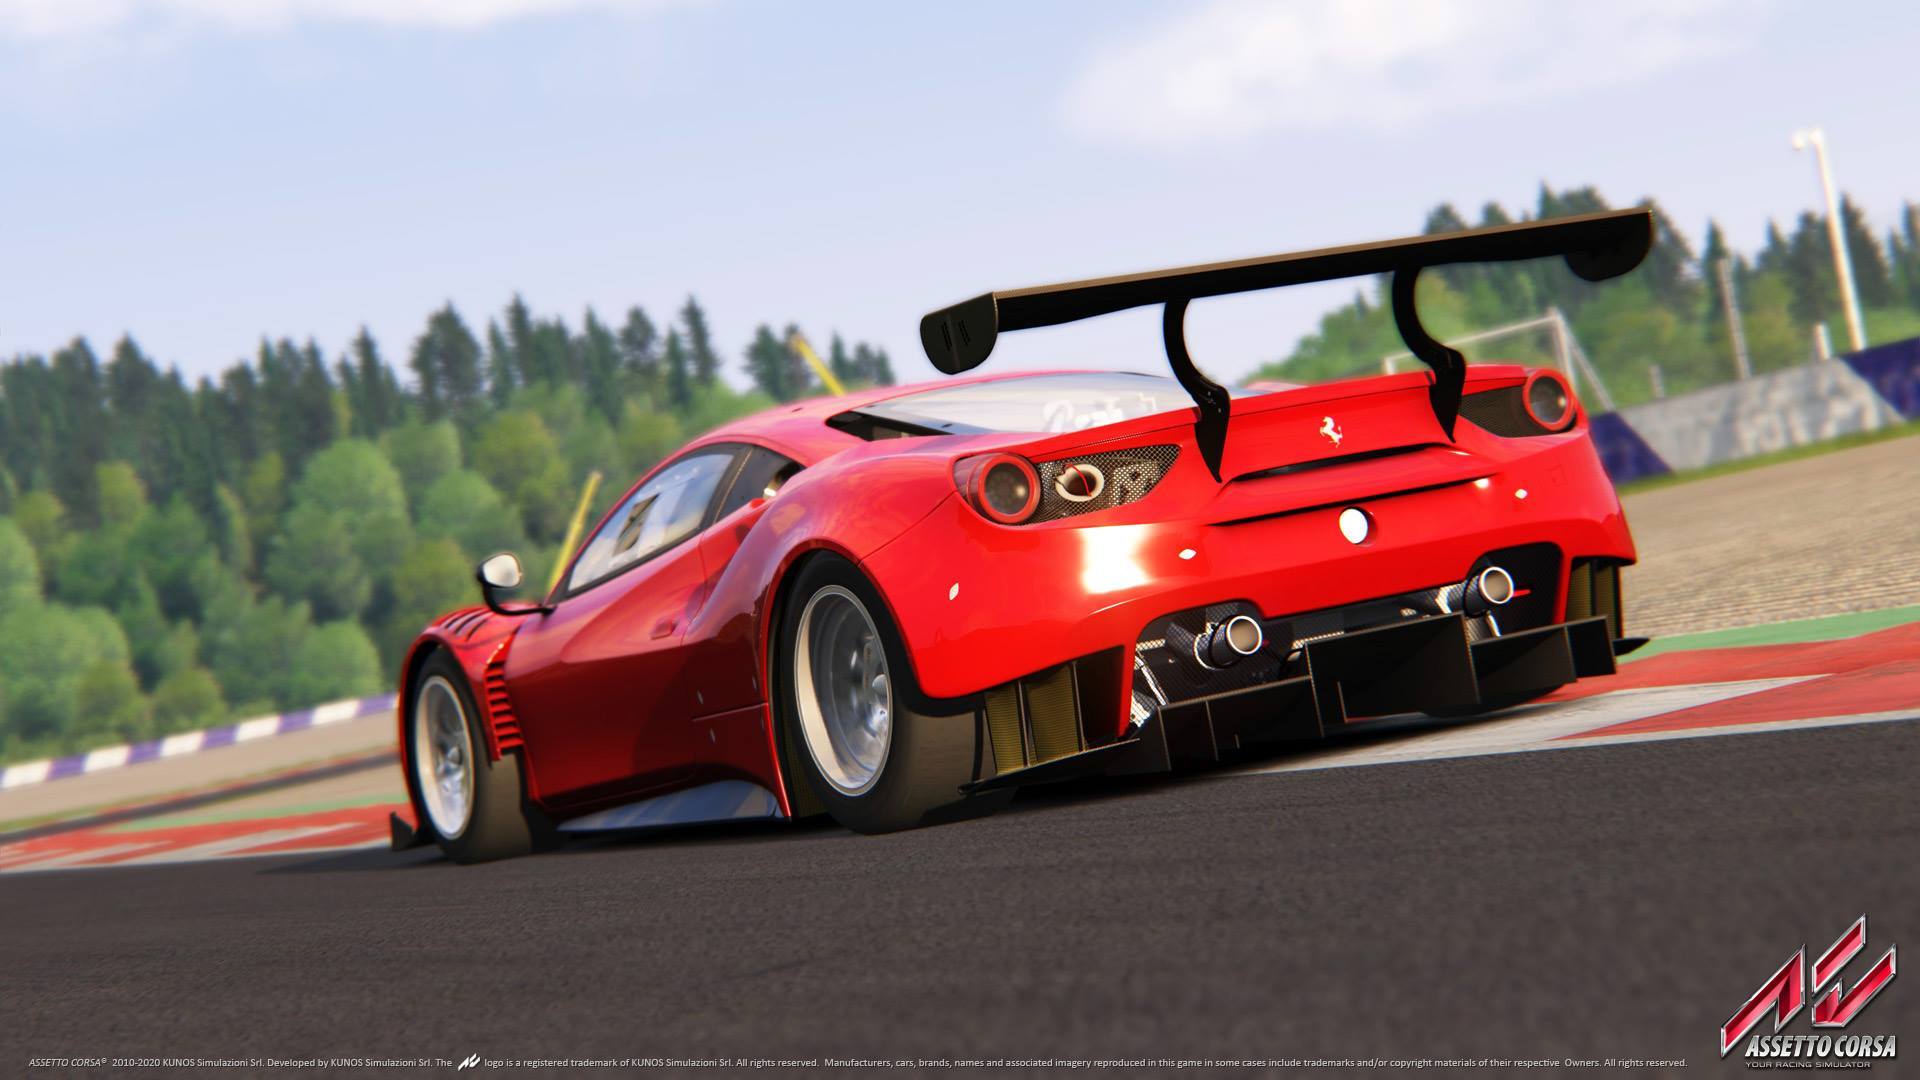 project cars pc dualshock